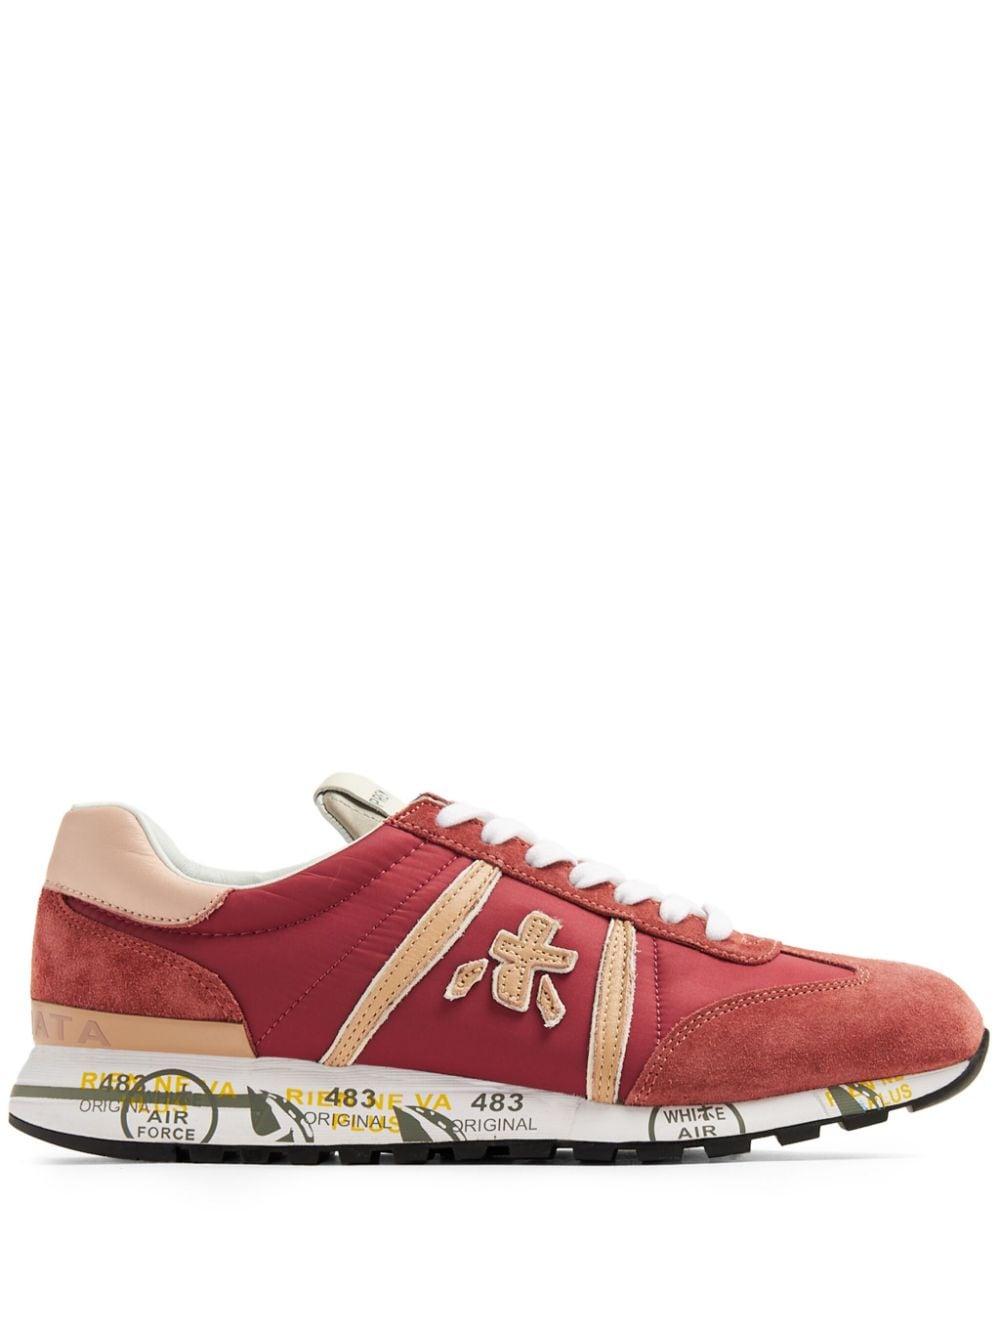 Premiata Lucyd Panelled Suede Sneakers in Red | Lyst